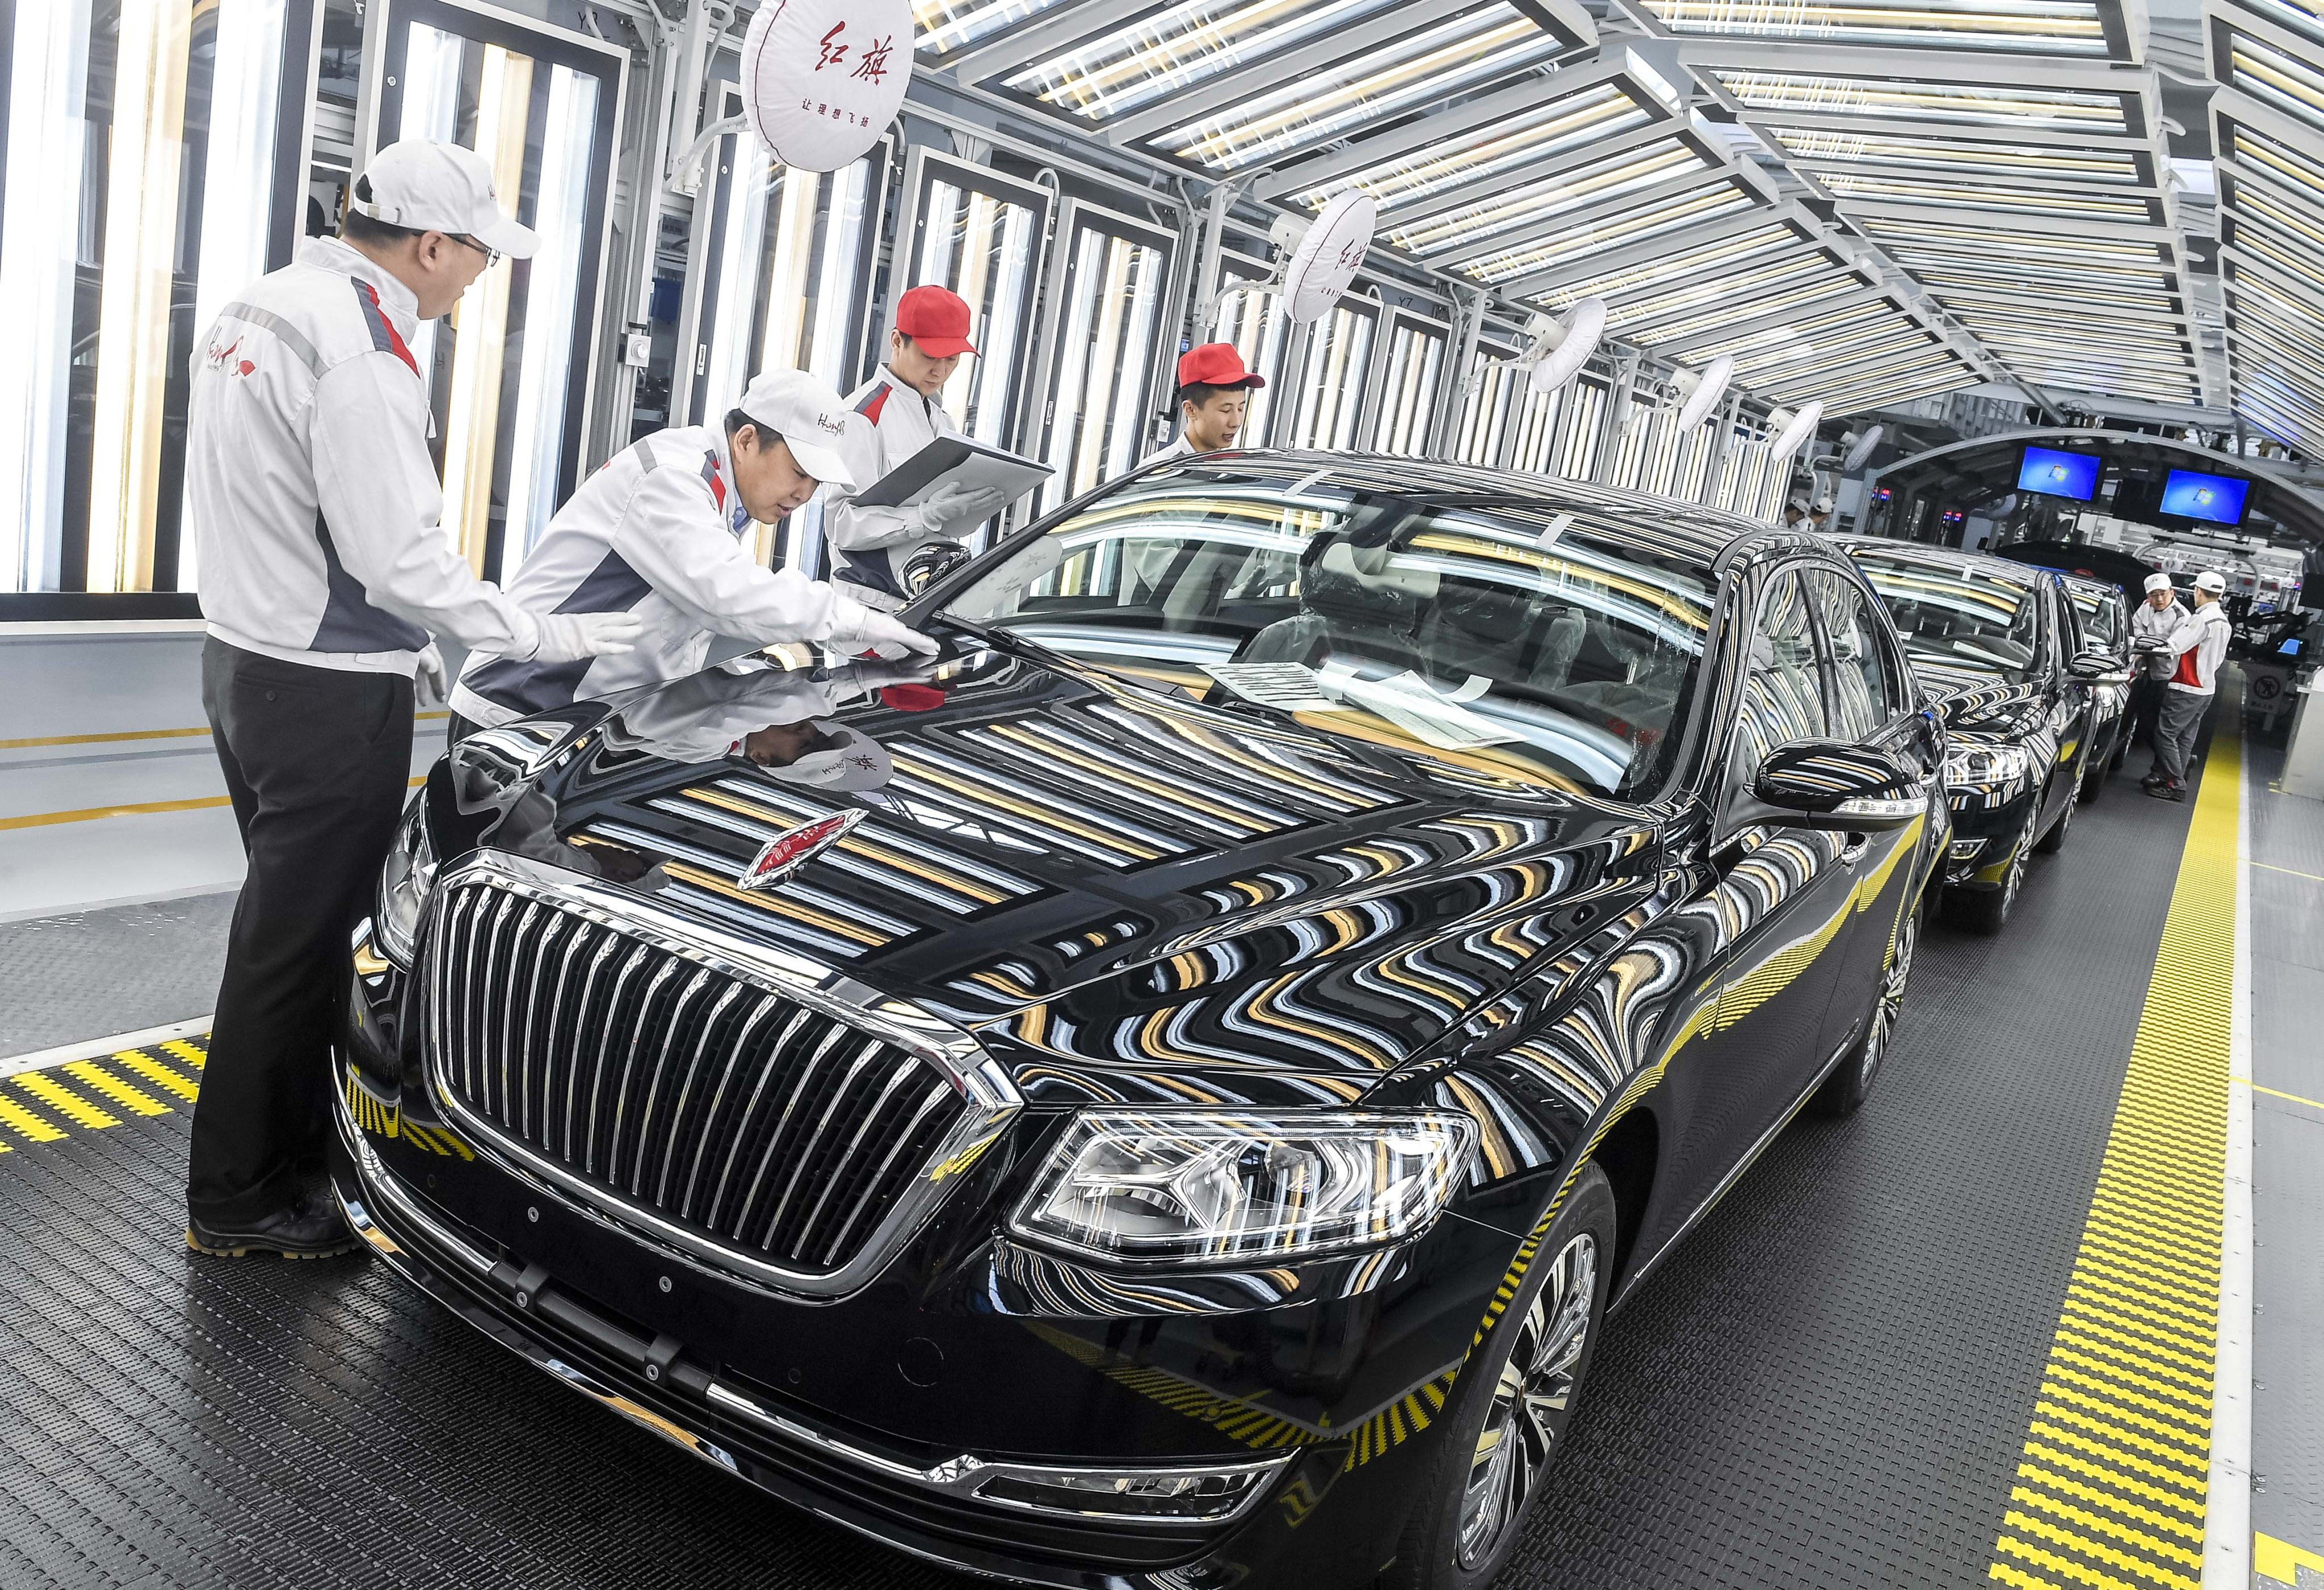 Staff members check FAW’s Hongqi cars in an assembly line in Changchun in April 2019. Photo: Xinhua